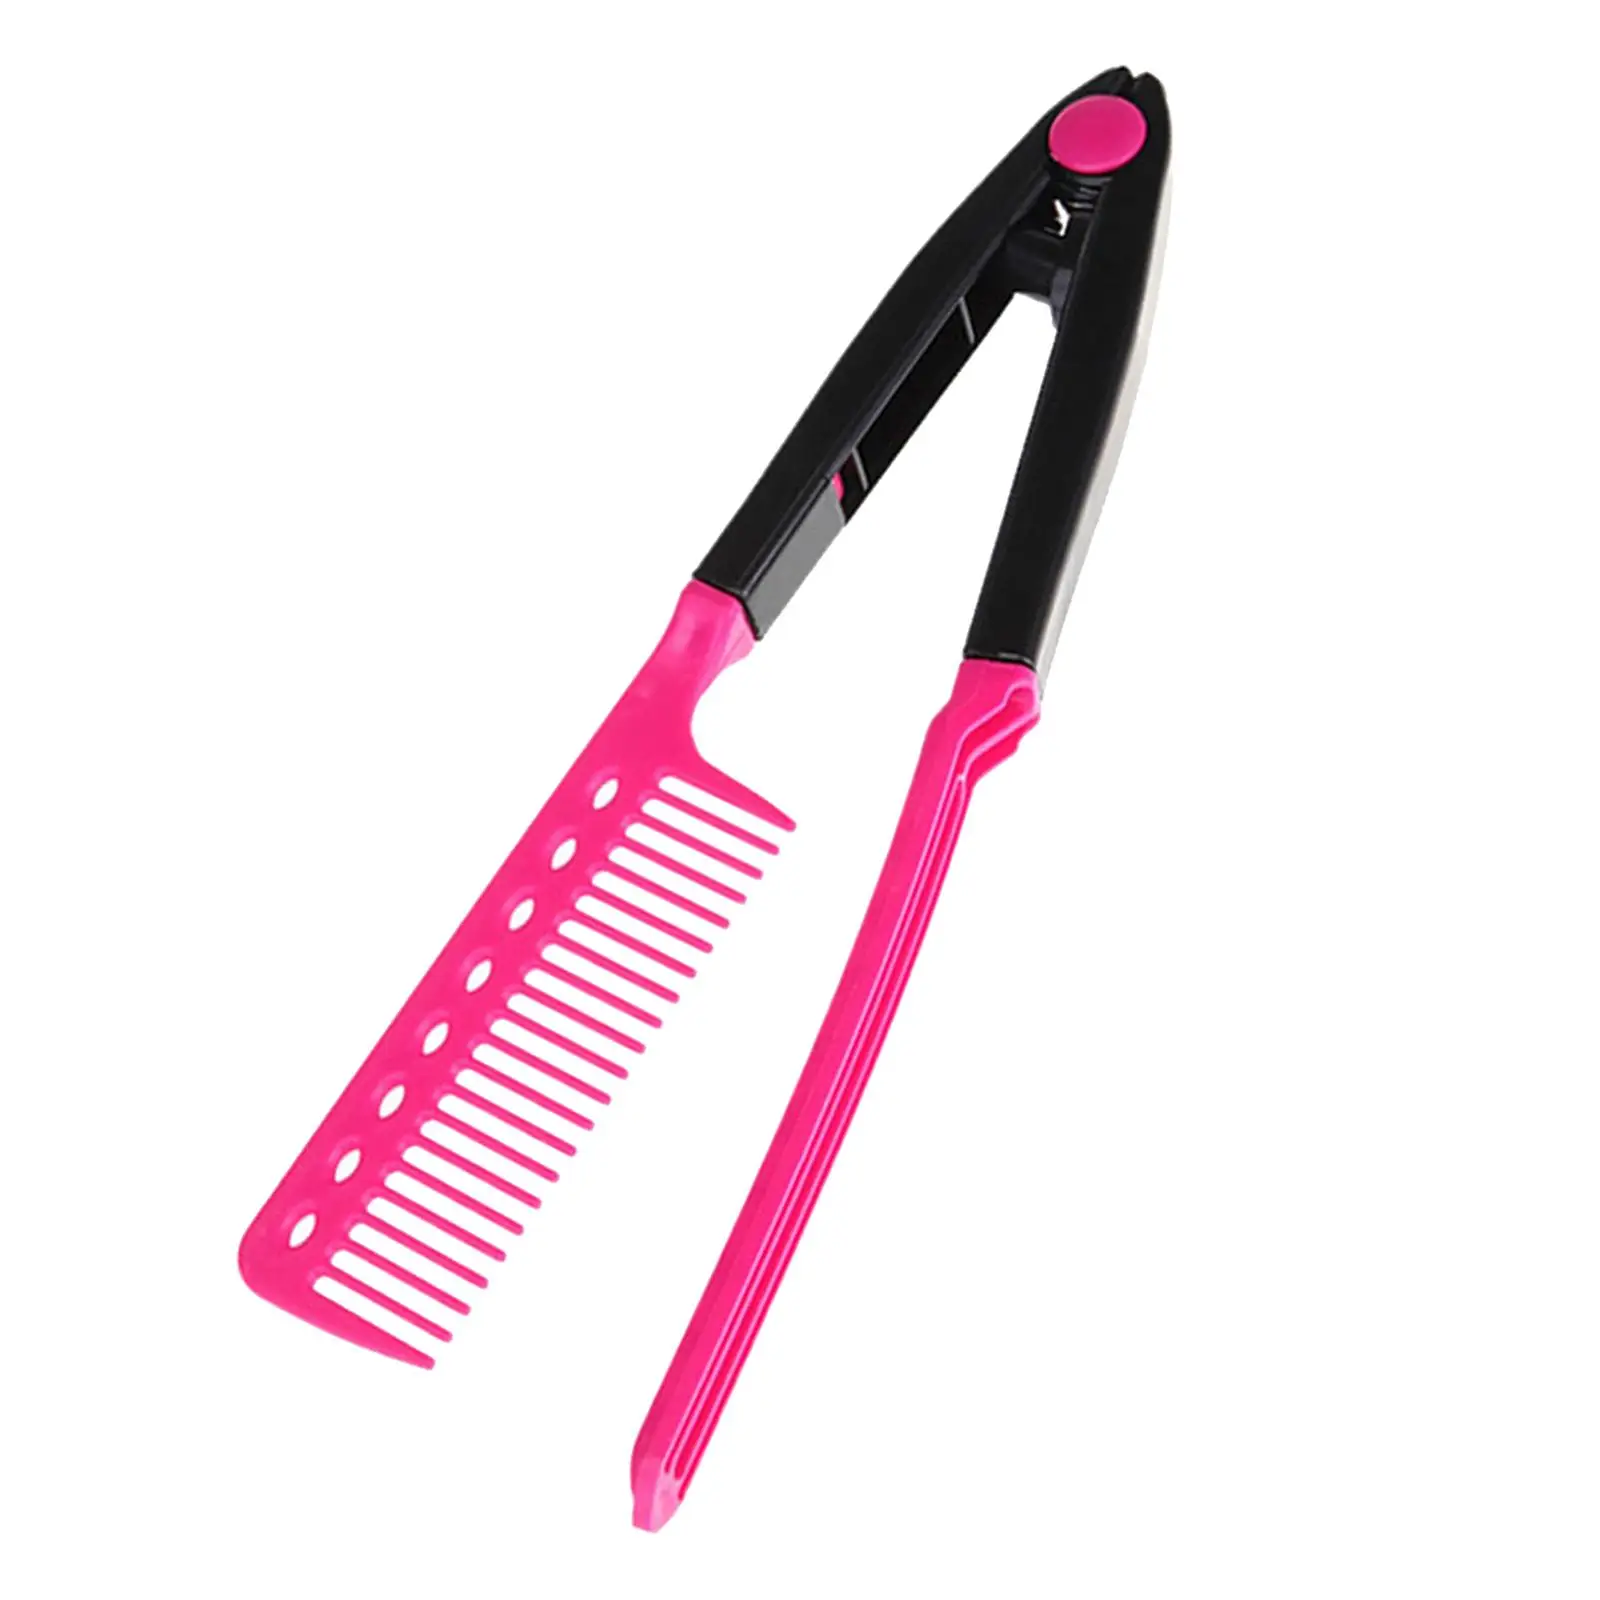 V Shaped Hair Straightener Comb Fashion with A Firm Grip Flat Iron Comb for Straight Hair